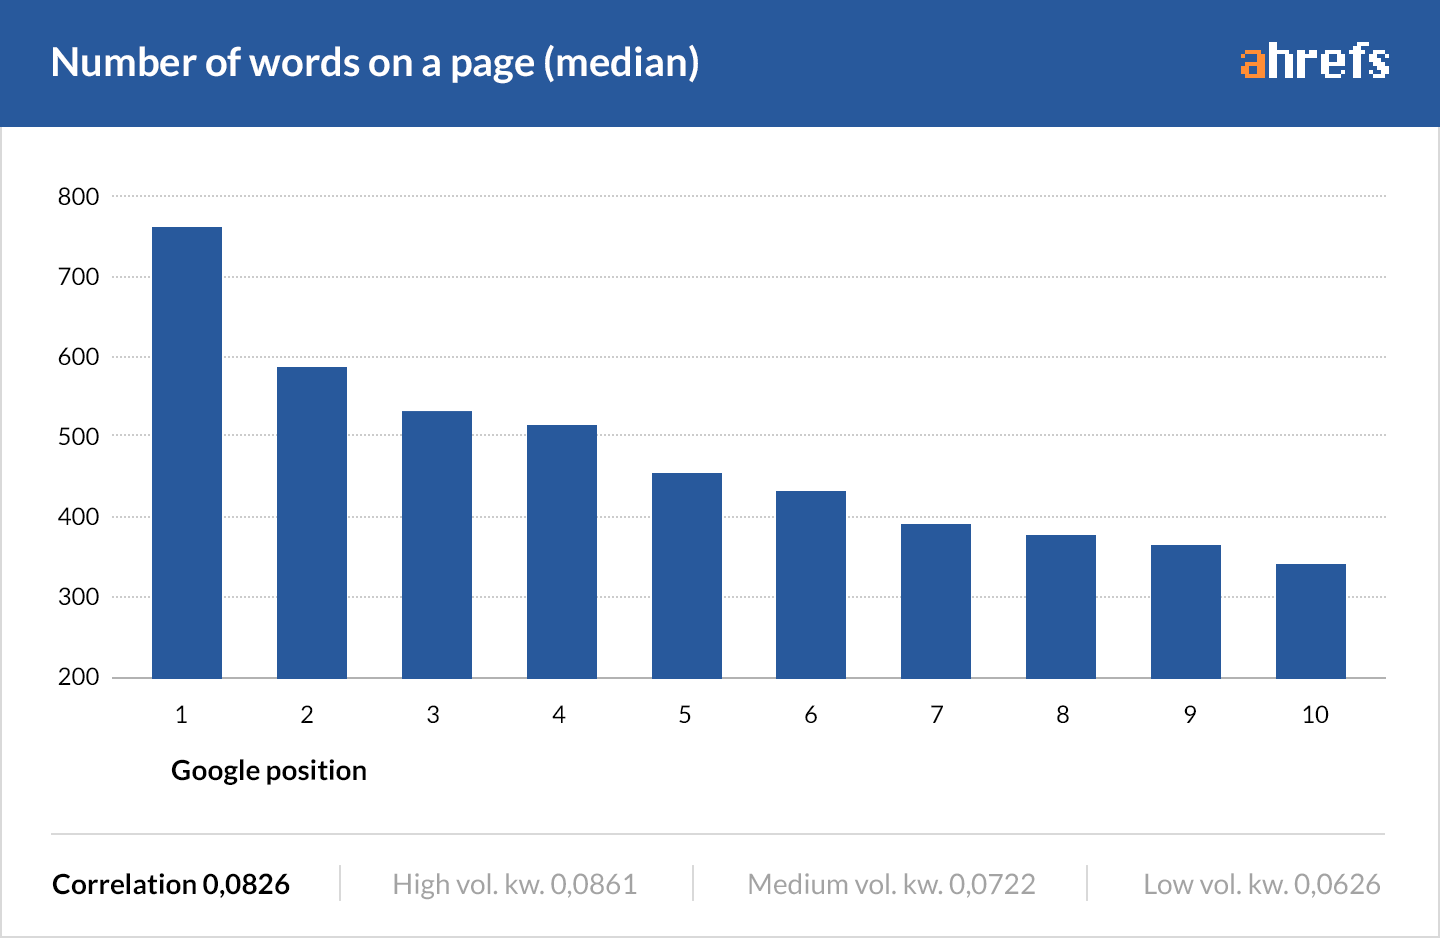 Number of words on a page